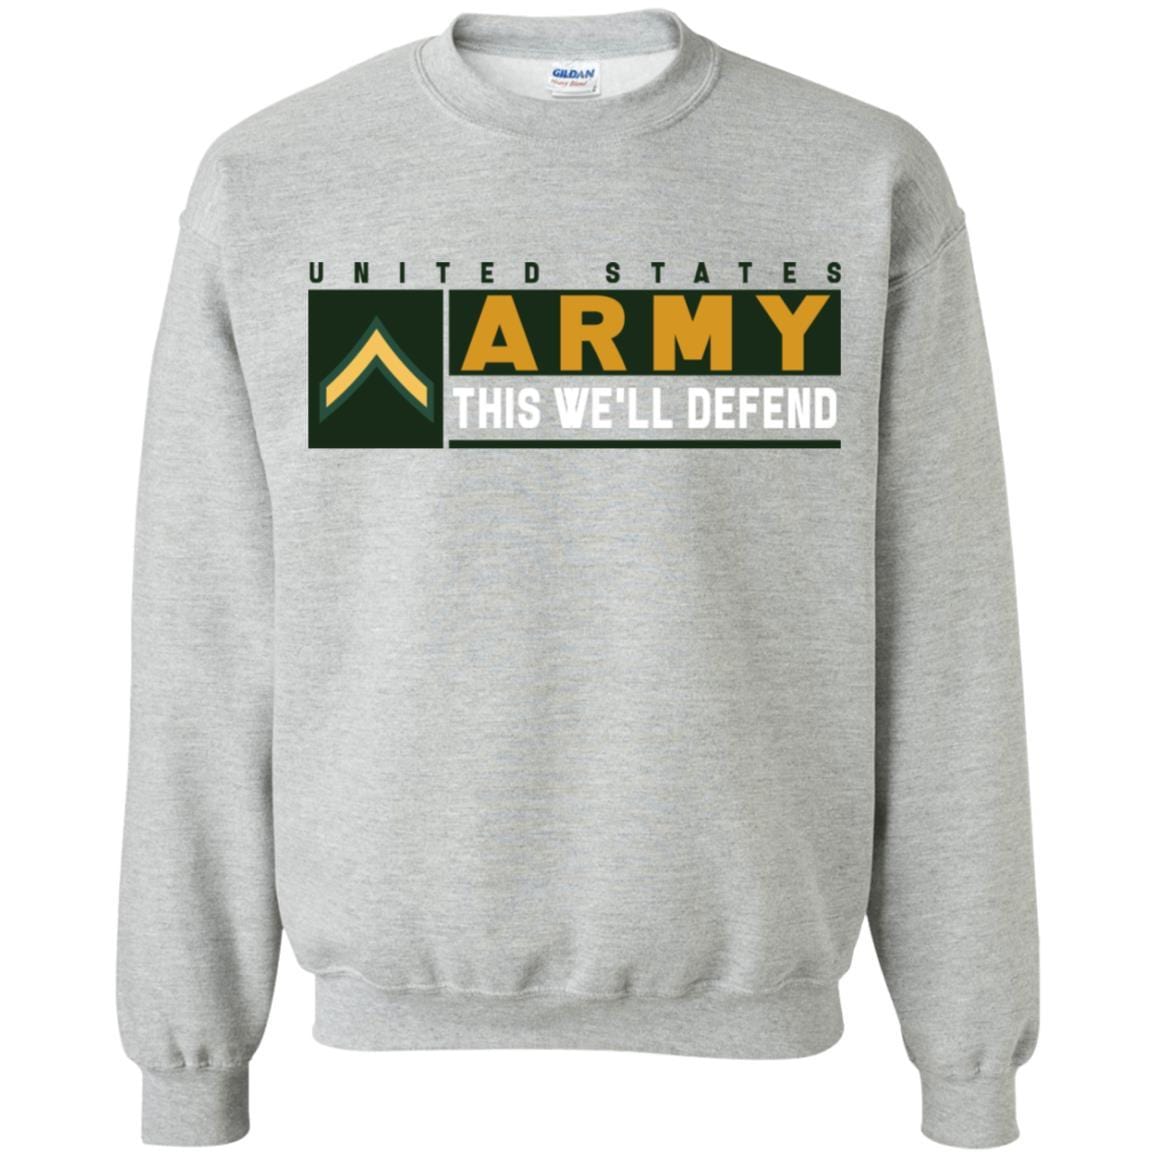 US Army E-2 Private Second Class This We Will Defend Long Sleeve - Pullover Hoodie-TShirt-Army-Veterans Nation